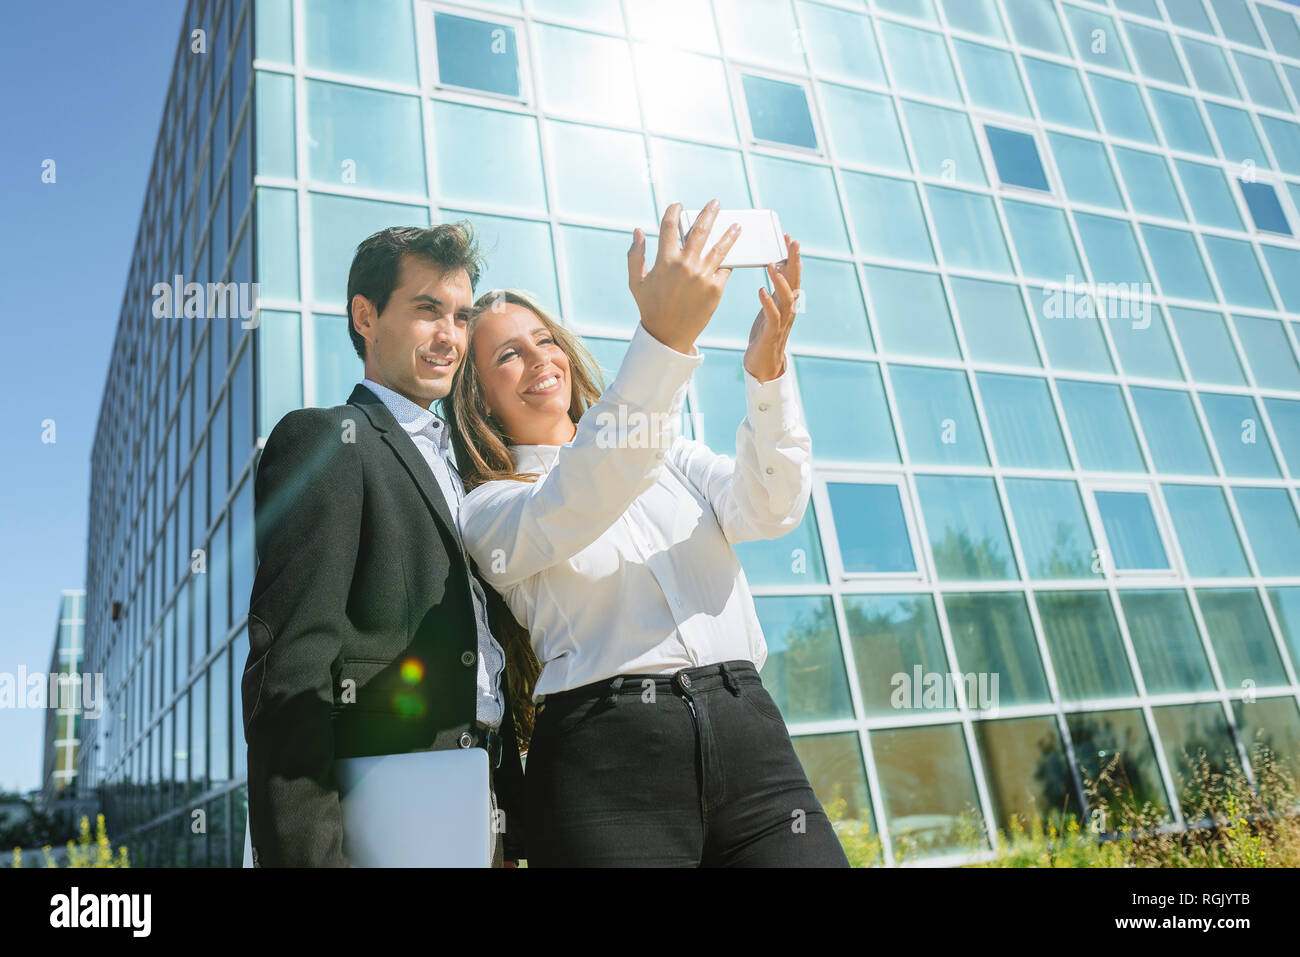 Smiling businesswoman and businessman taking a selfie outside office building Stock Photo